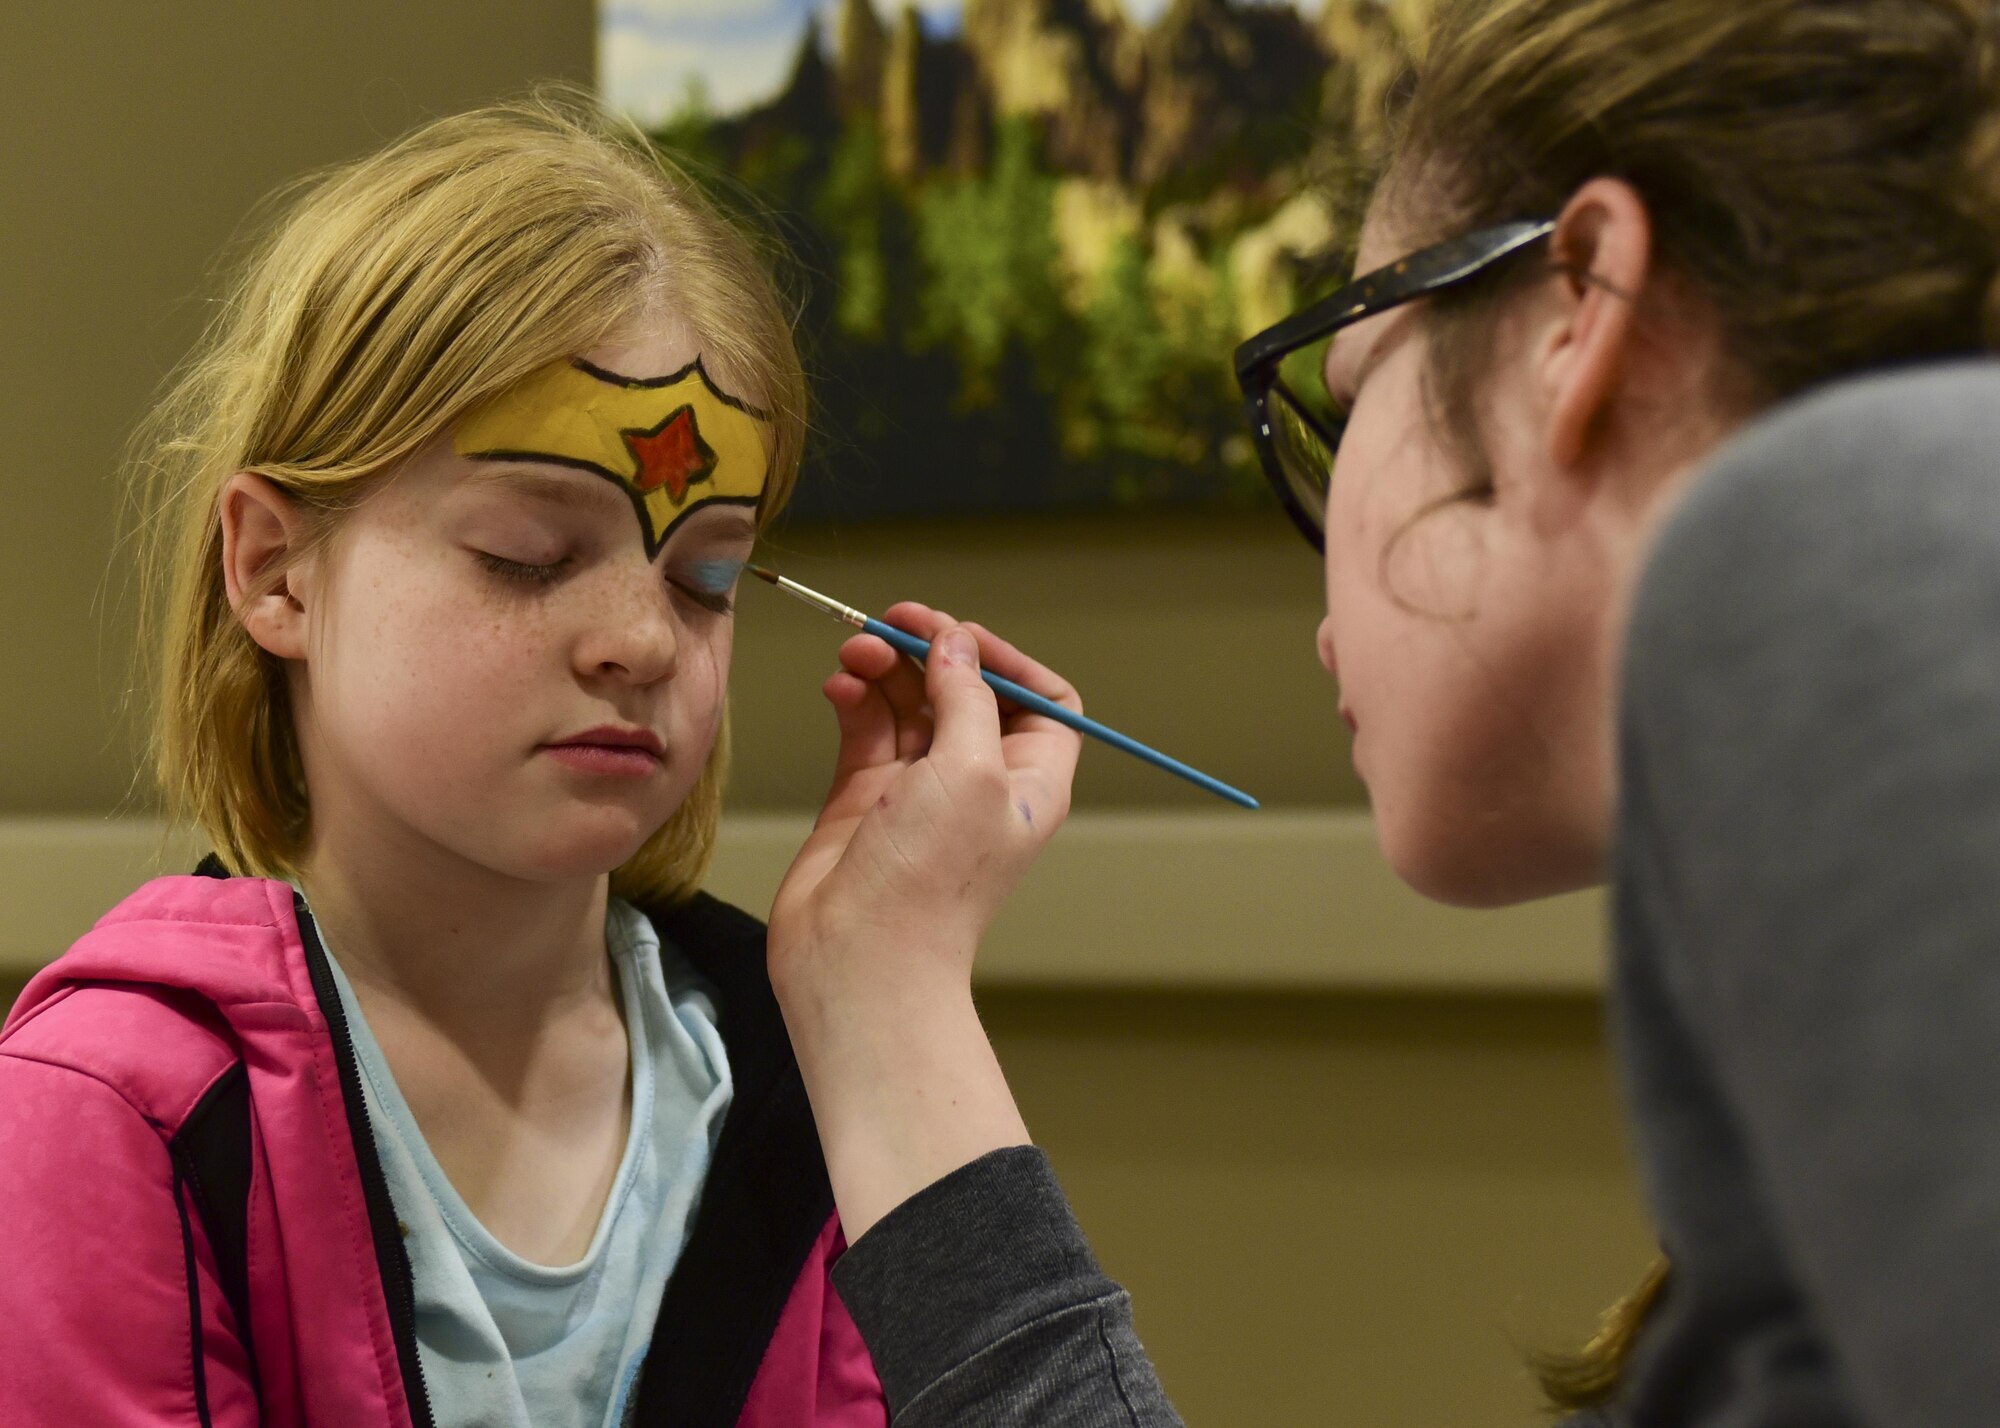 Jennifer Strickland, the daughter of 1st Lt. Daniel Strickland, the 28th Medical Readiness flight commander assigned to the 28th Medical Squadron, has her face painted by Jeena Simunek during the 2017 Children’s Fair inside the 28th Medical Group at Ellsworth Air Force Base, S.D., April 20, 2017. The Children’s Fair raises awareness for child abuse prevention, and provides parents with on and off-base family-centered resources. (U.S. Air Force photo by Airman 1st Class Randahl J. Jenson)  